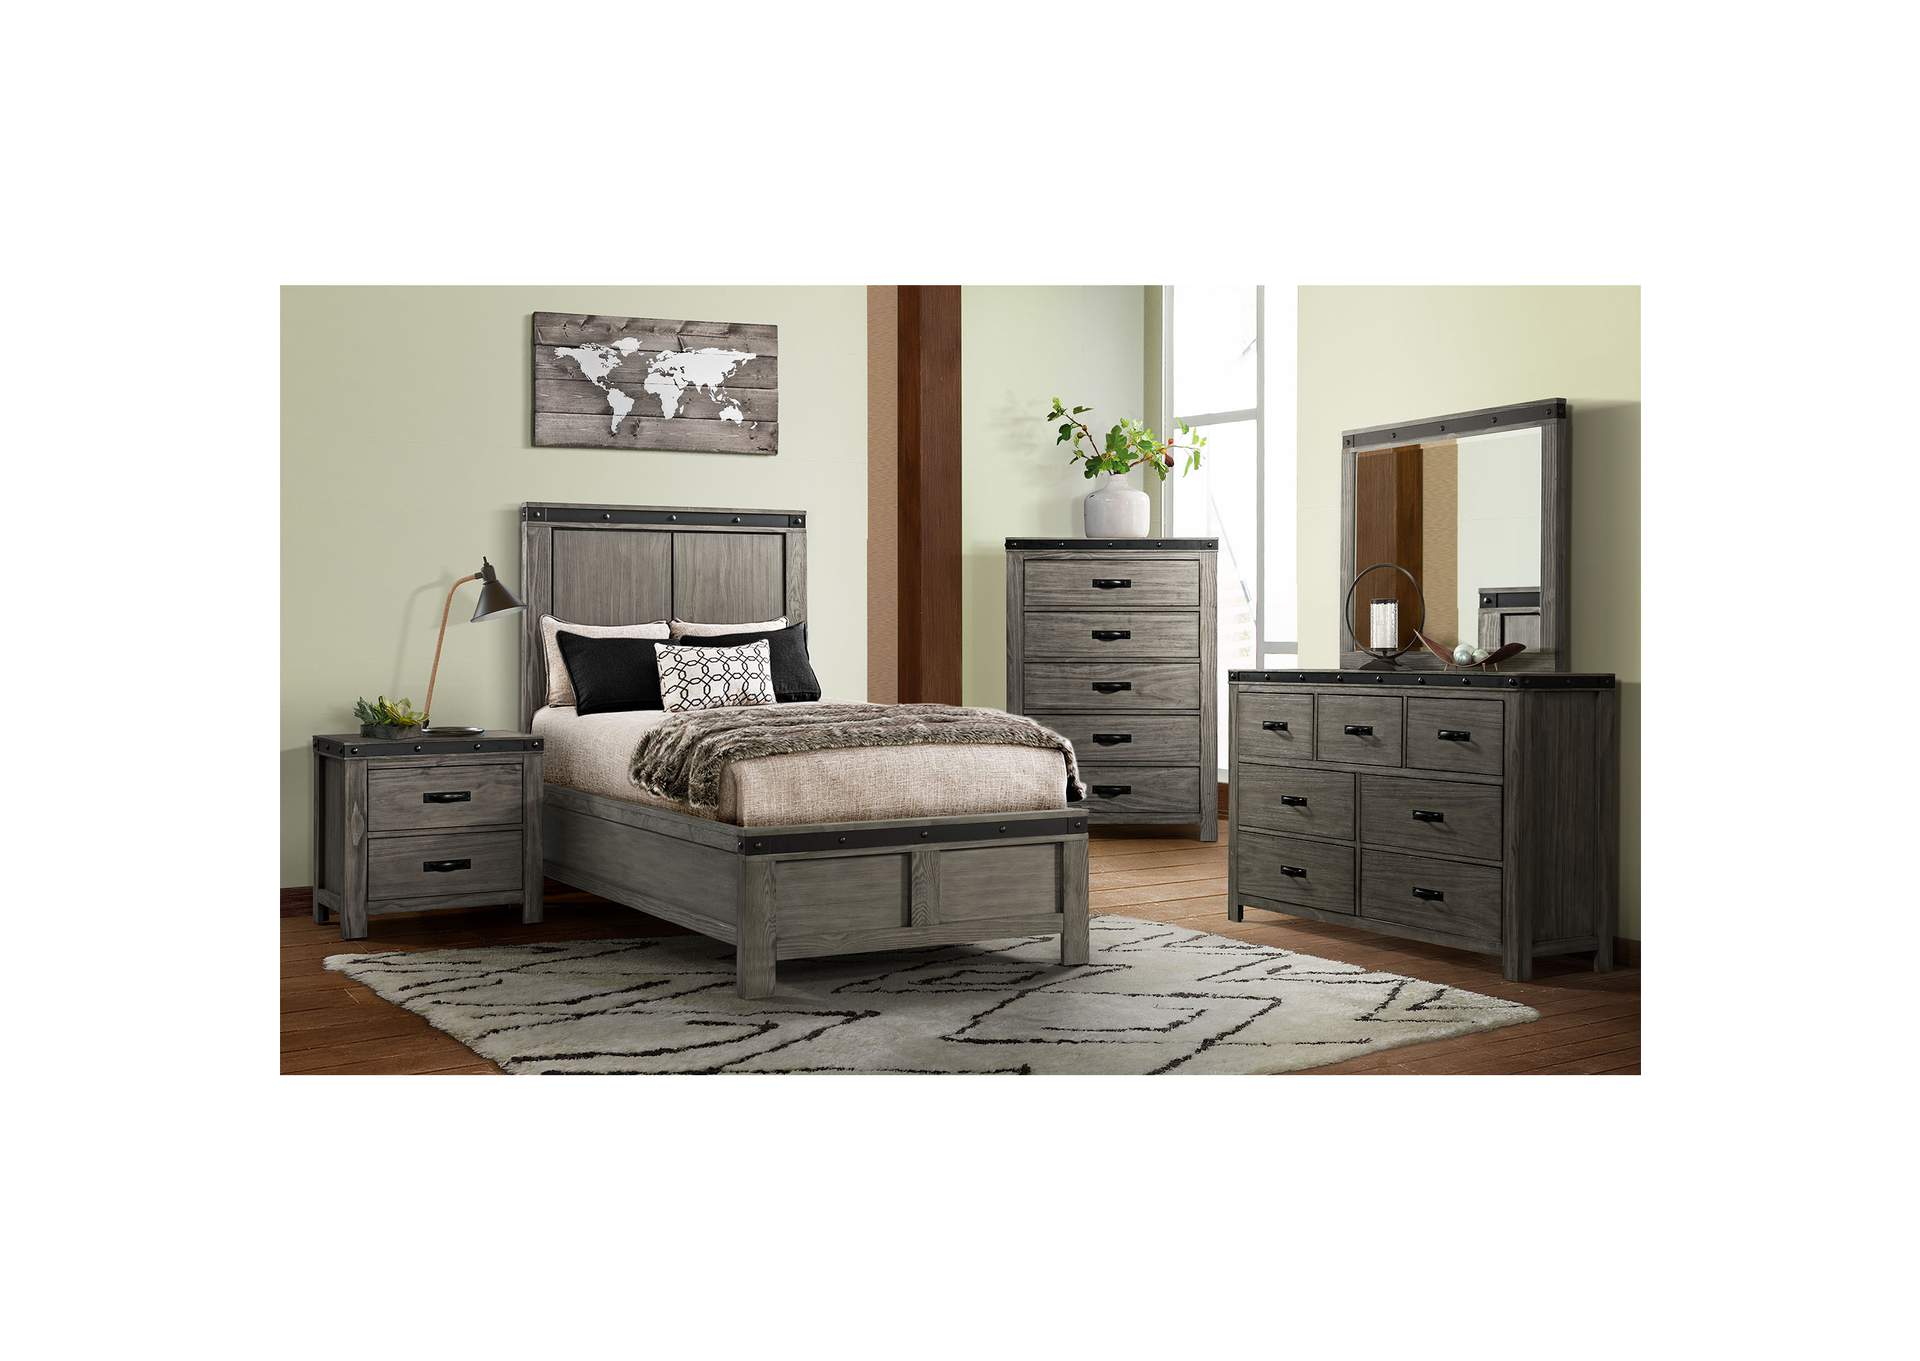 Wade Twin Bed,Elements